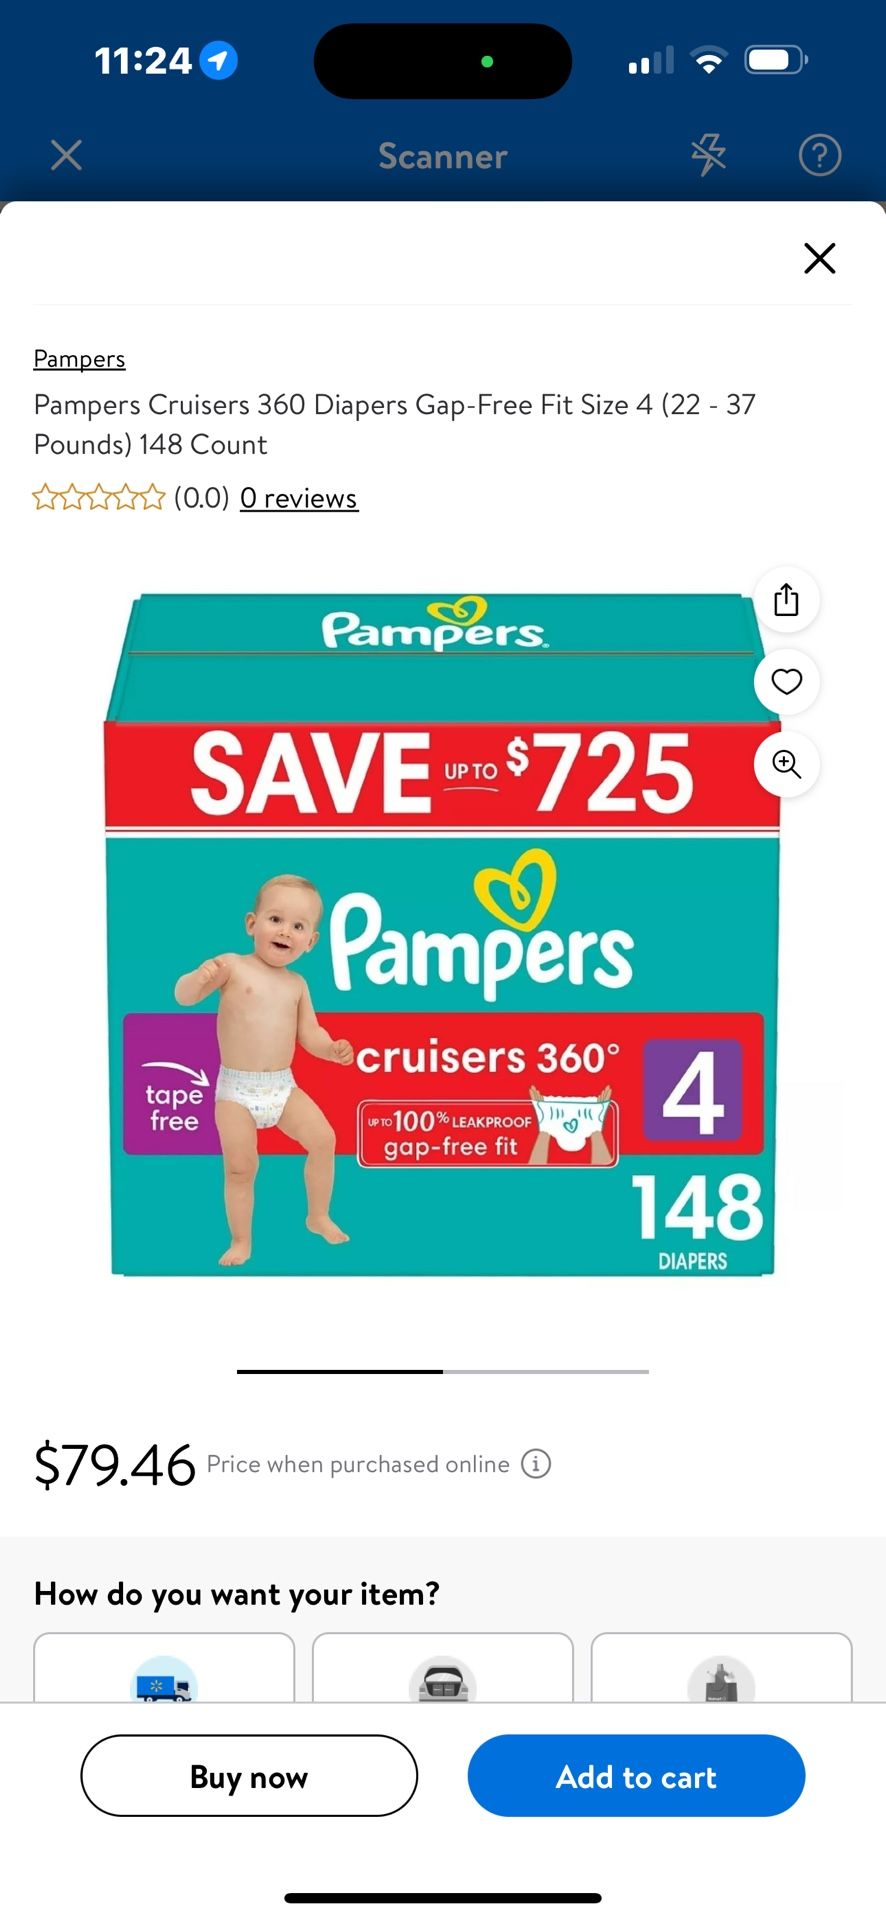 Pampers Cruisers Size 4 